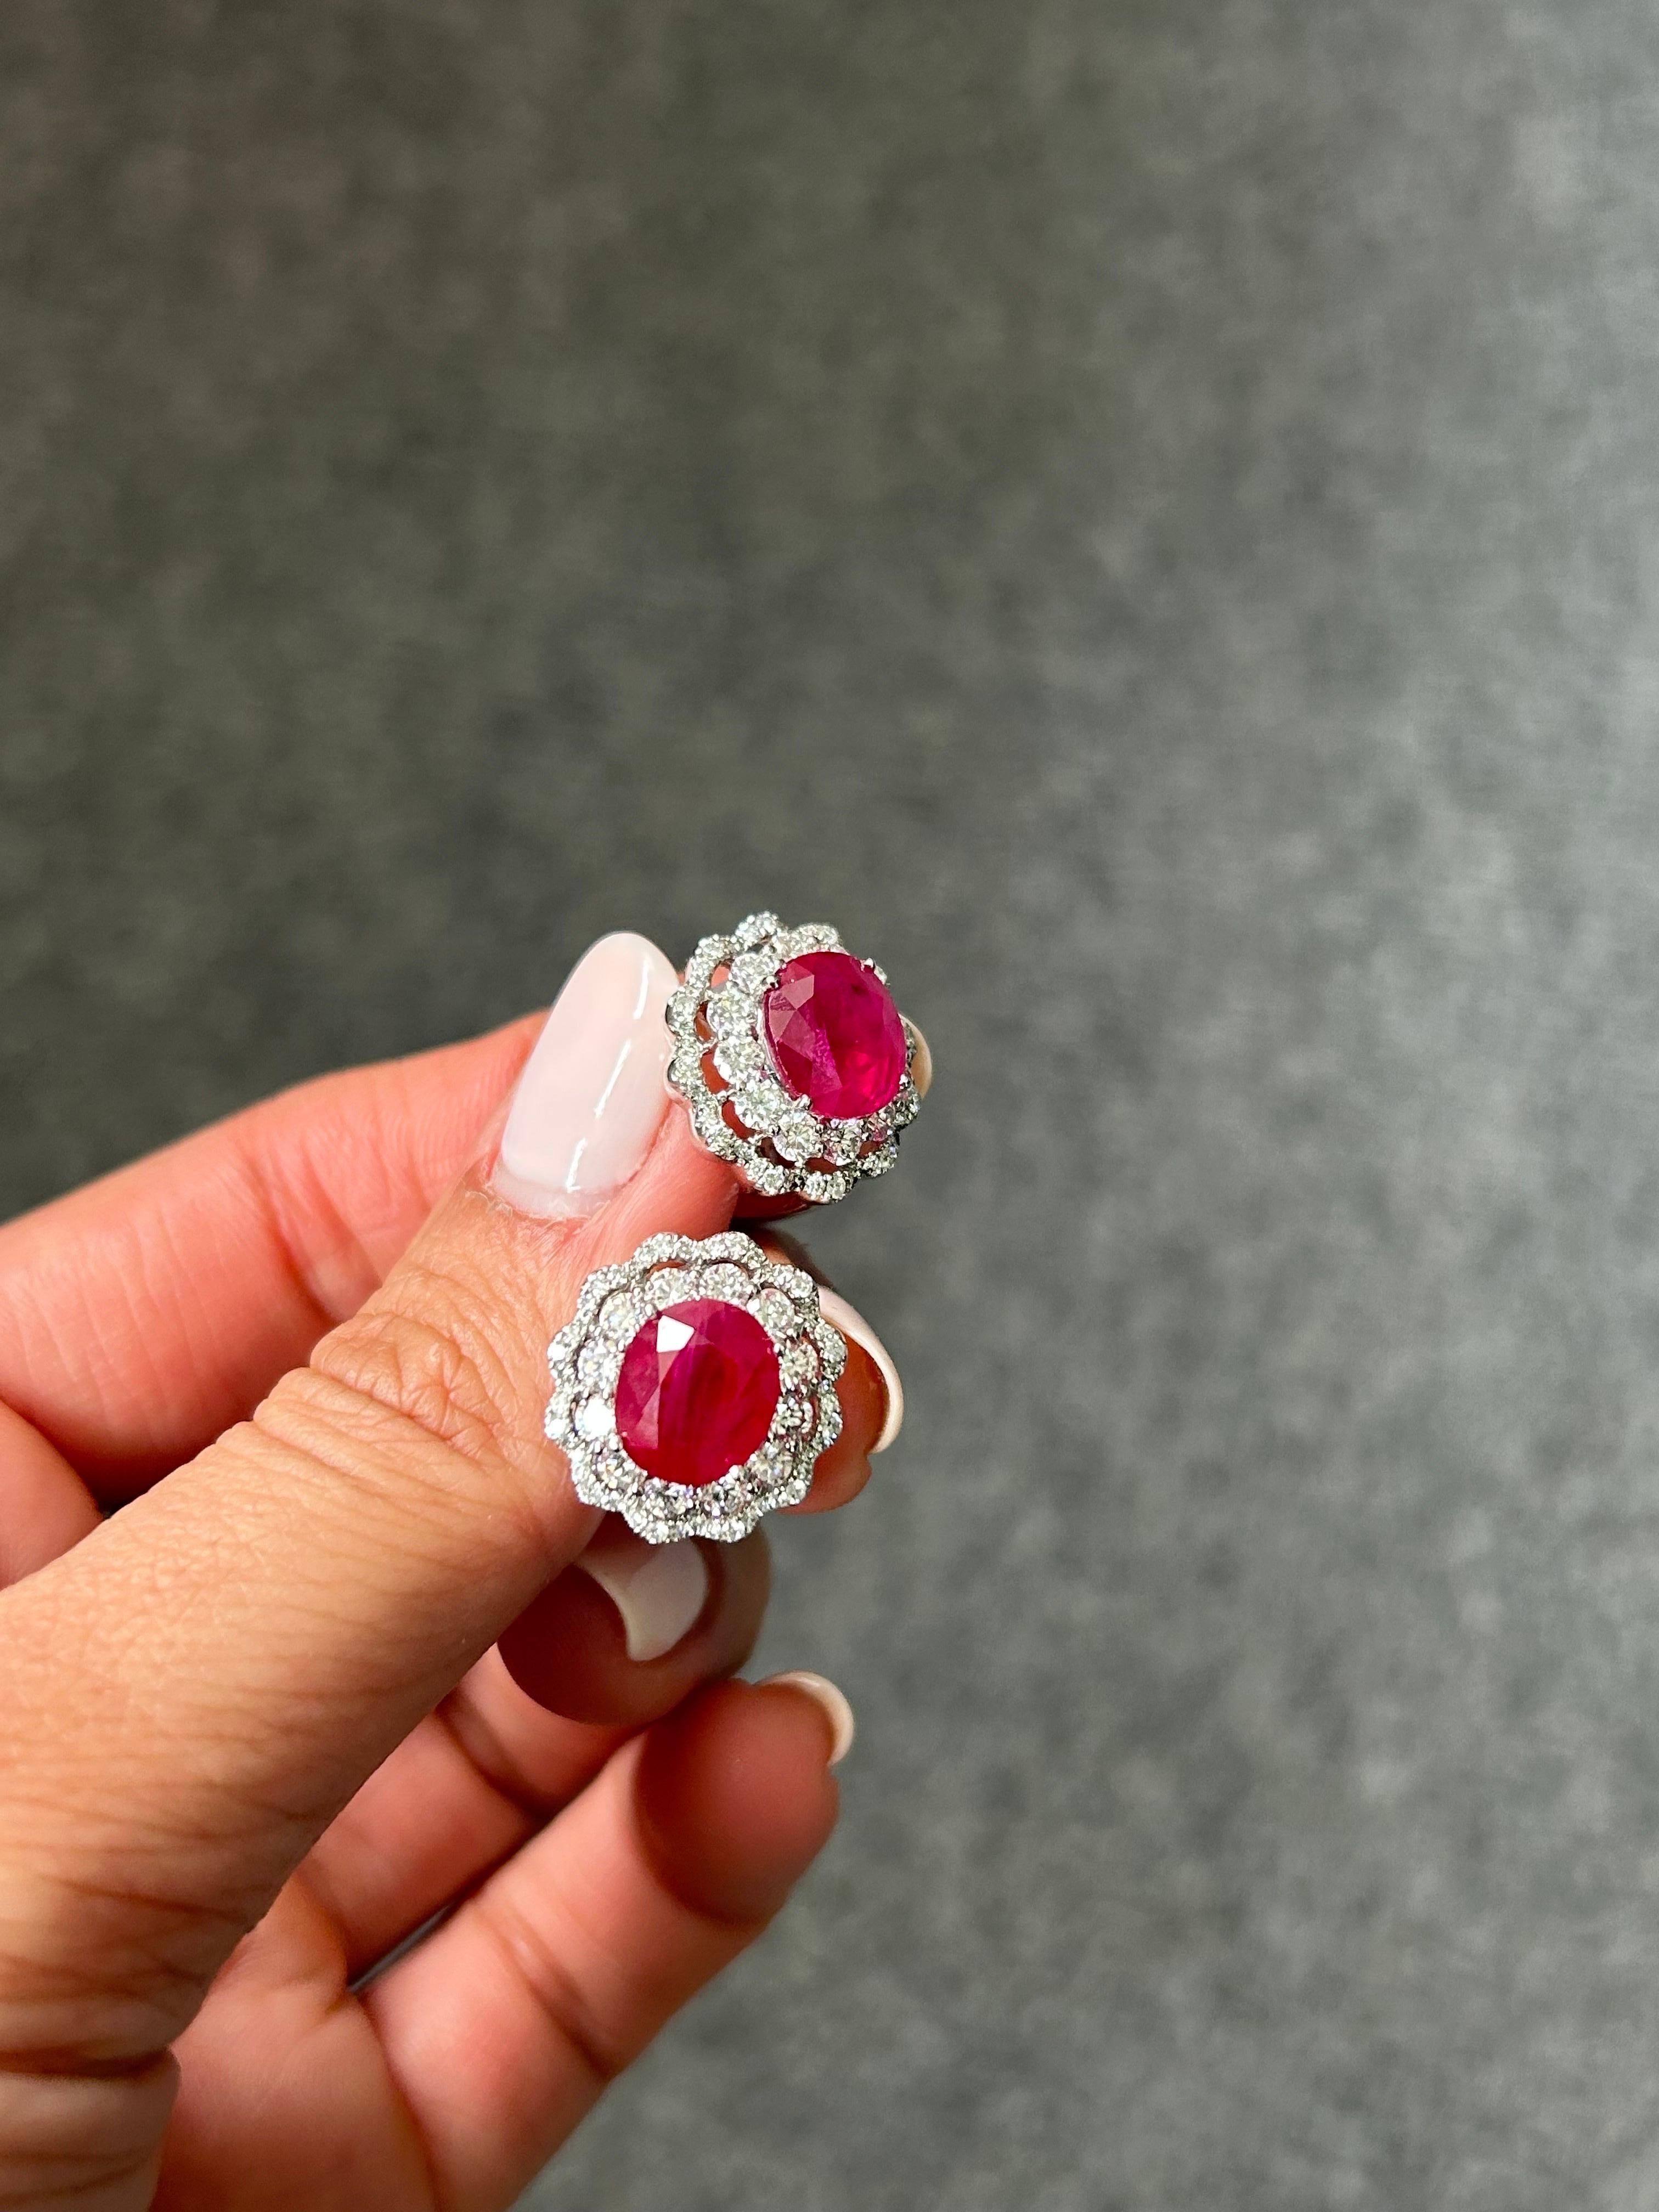 A stunning pair of GRS certified 7.5 carats oval shaped Burma Ruby studs, with 2.05 carat VS quality, G/H color Diamonds. The earrings come with an omega backing. 